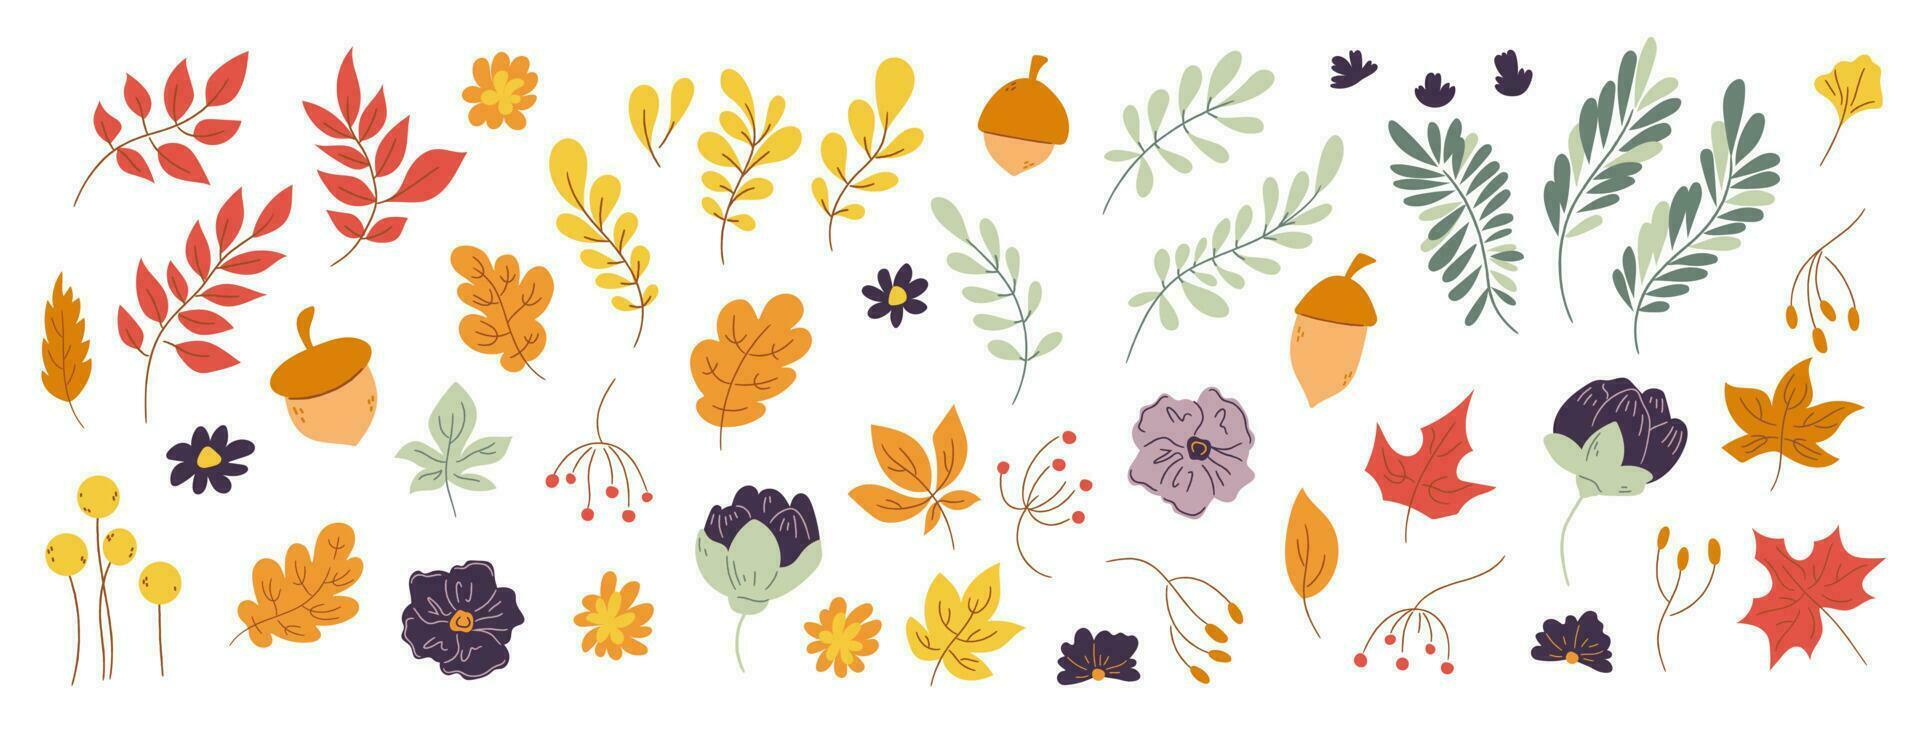 doodle set of hand drawn  fall floral design elements. vector